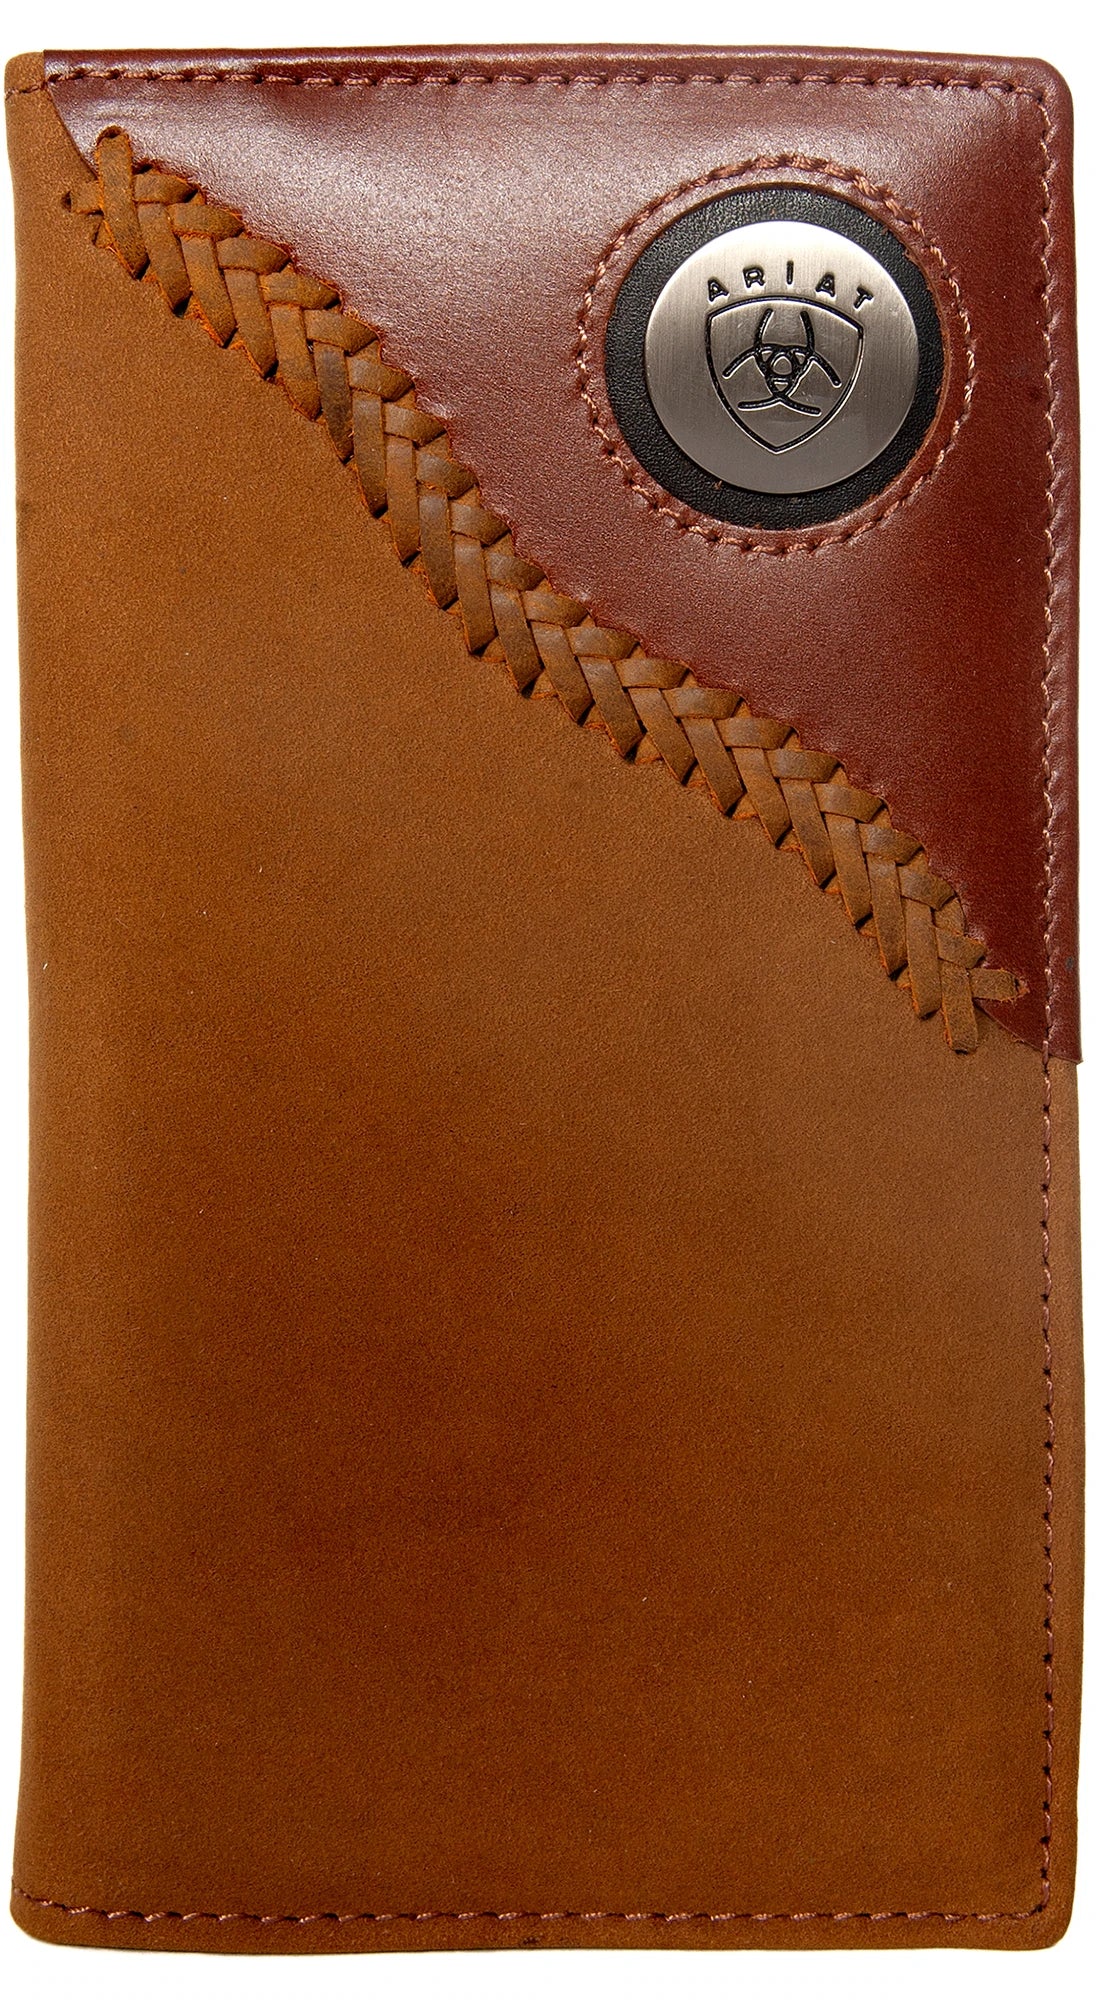 Ariat Rodeo Wallet - Two Toned Stitched